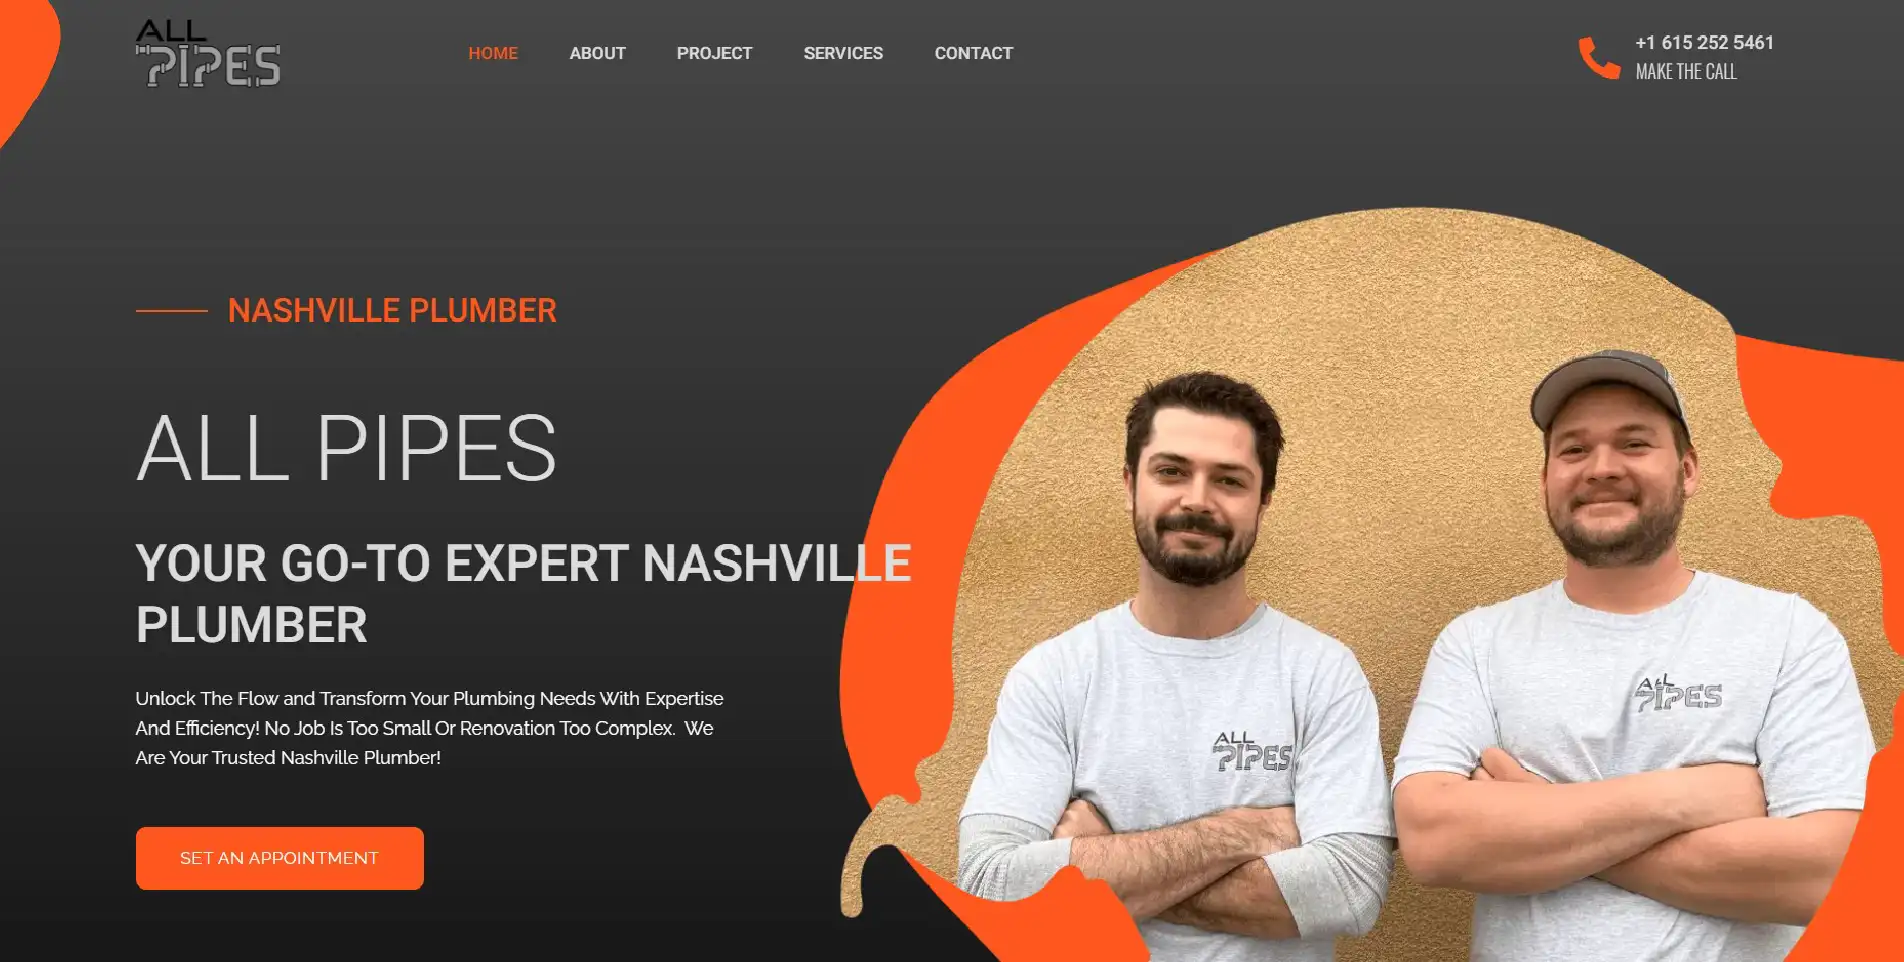 Hero section of the All Pipes plumbing website, prominently featuring a portrait of owners Robert and Jay.